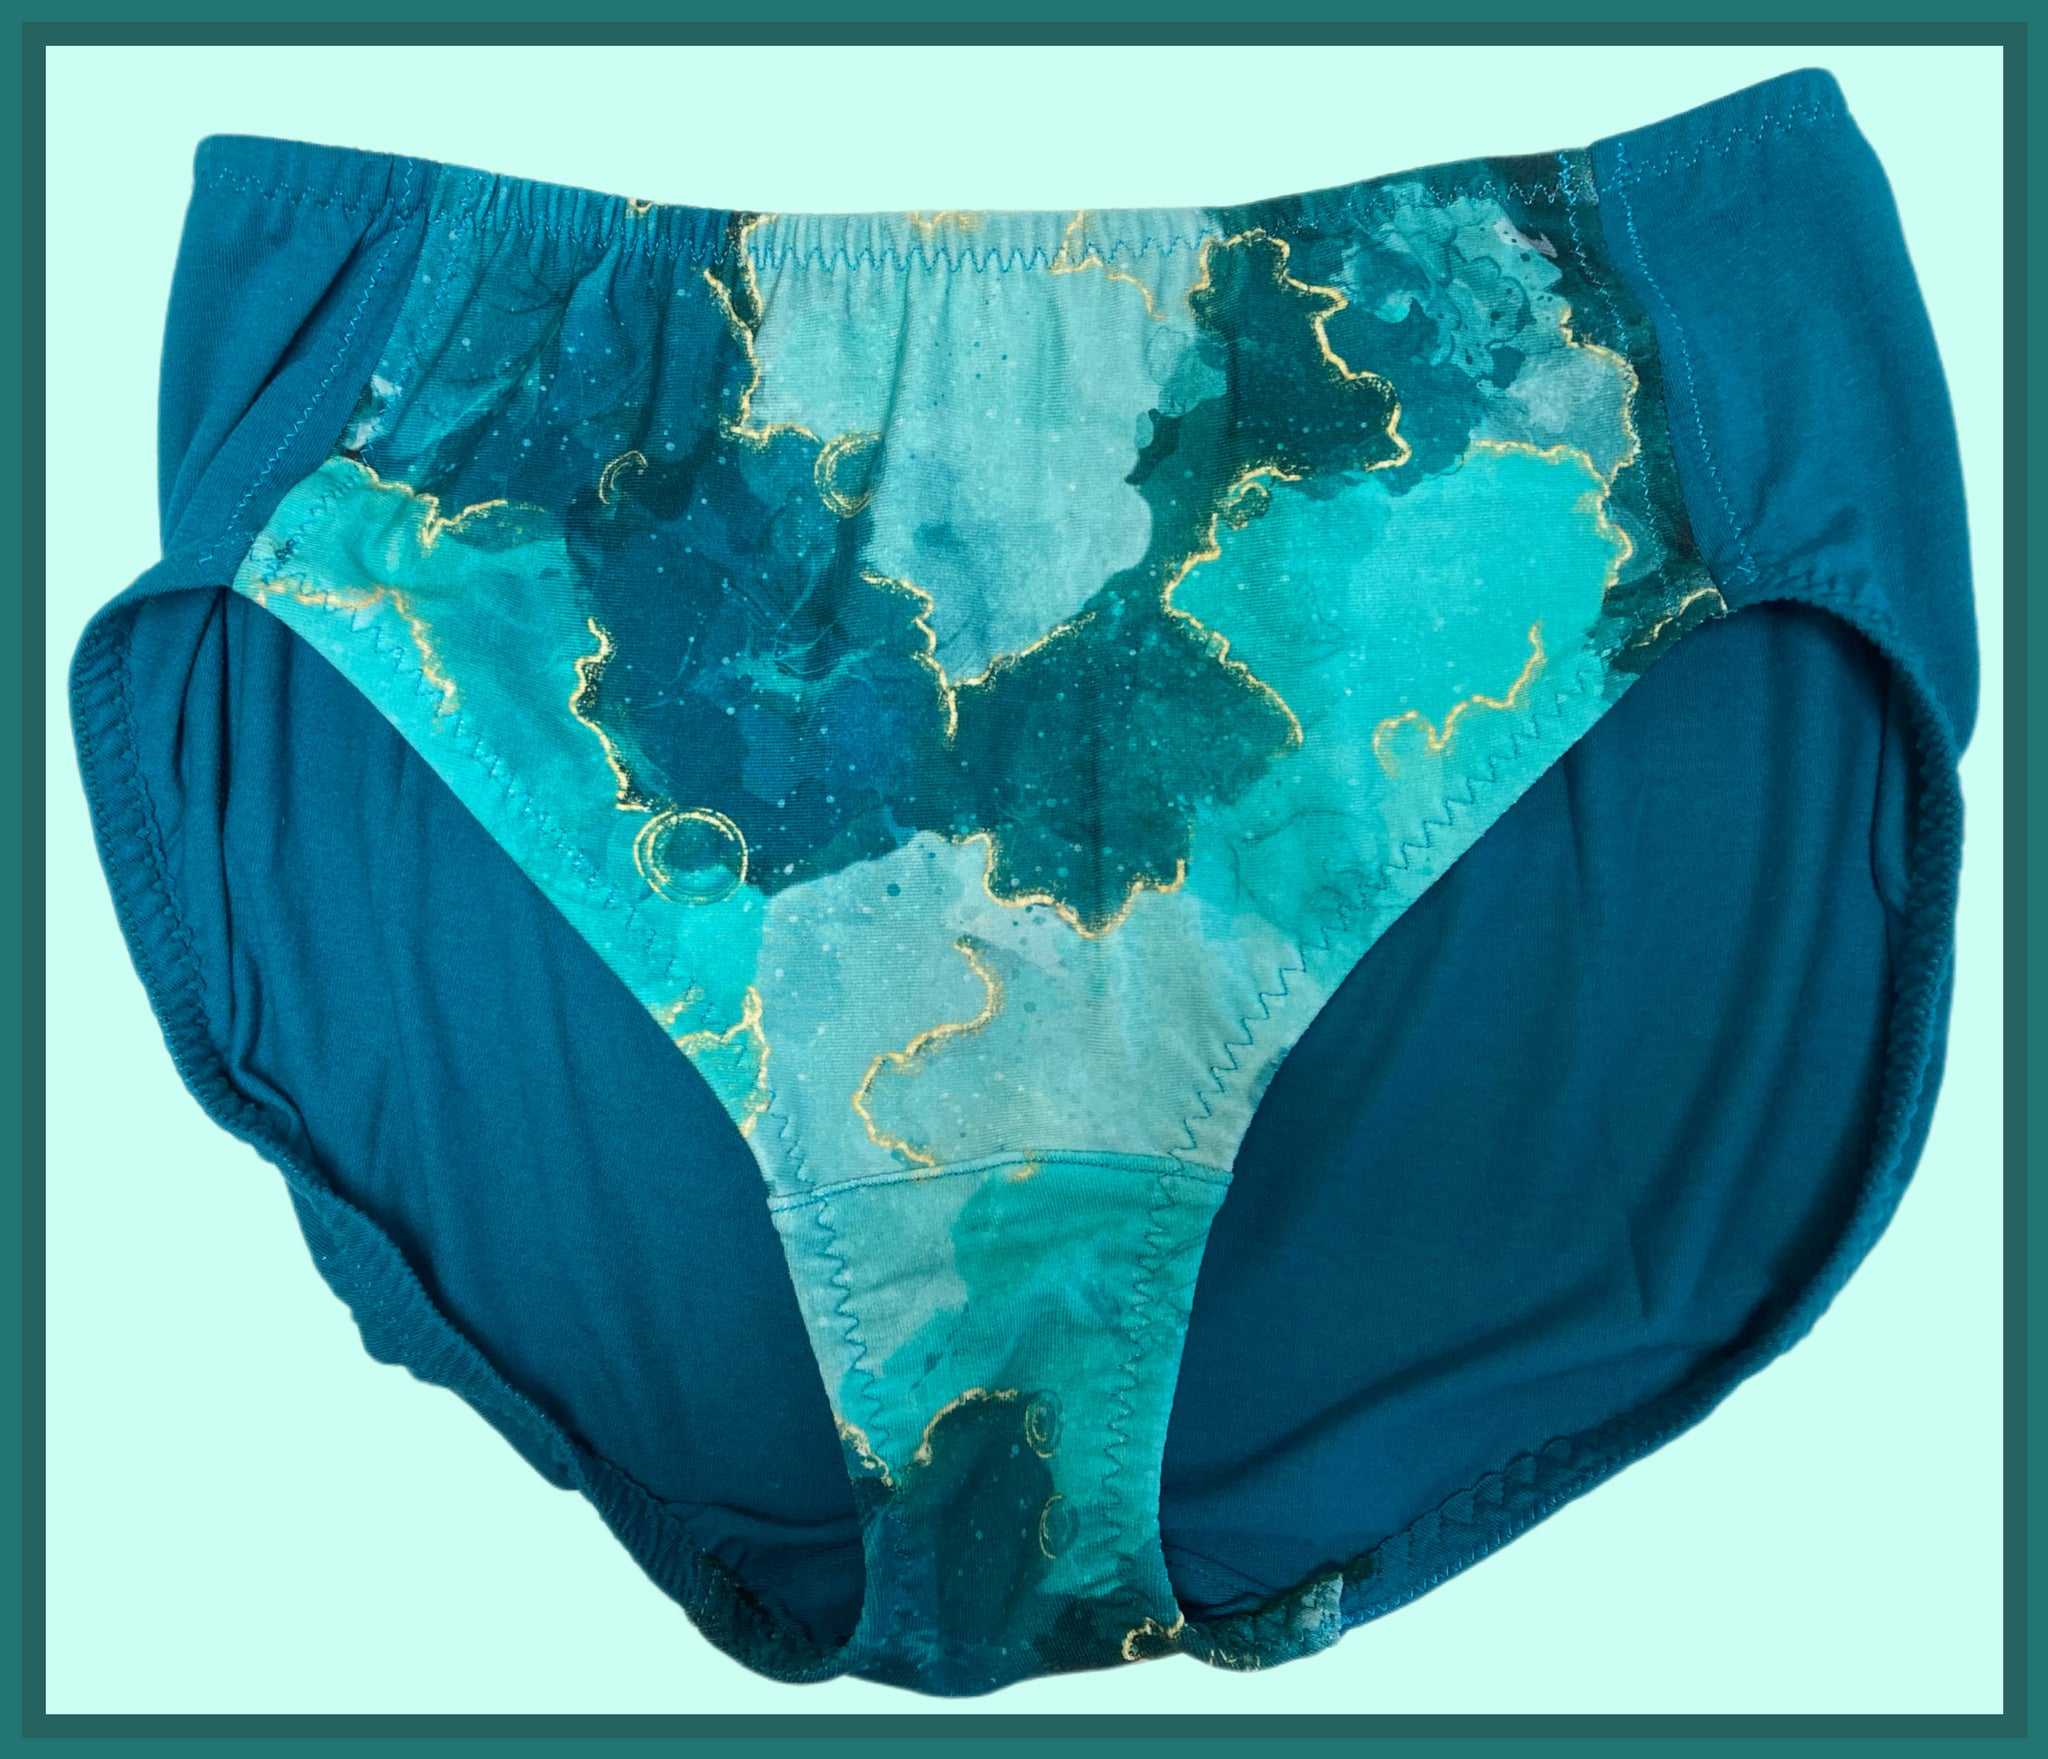 LEARN TO MAKE YOUR OWN CUSTOM PANTIES: VIDEO, KIT, PATTERN